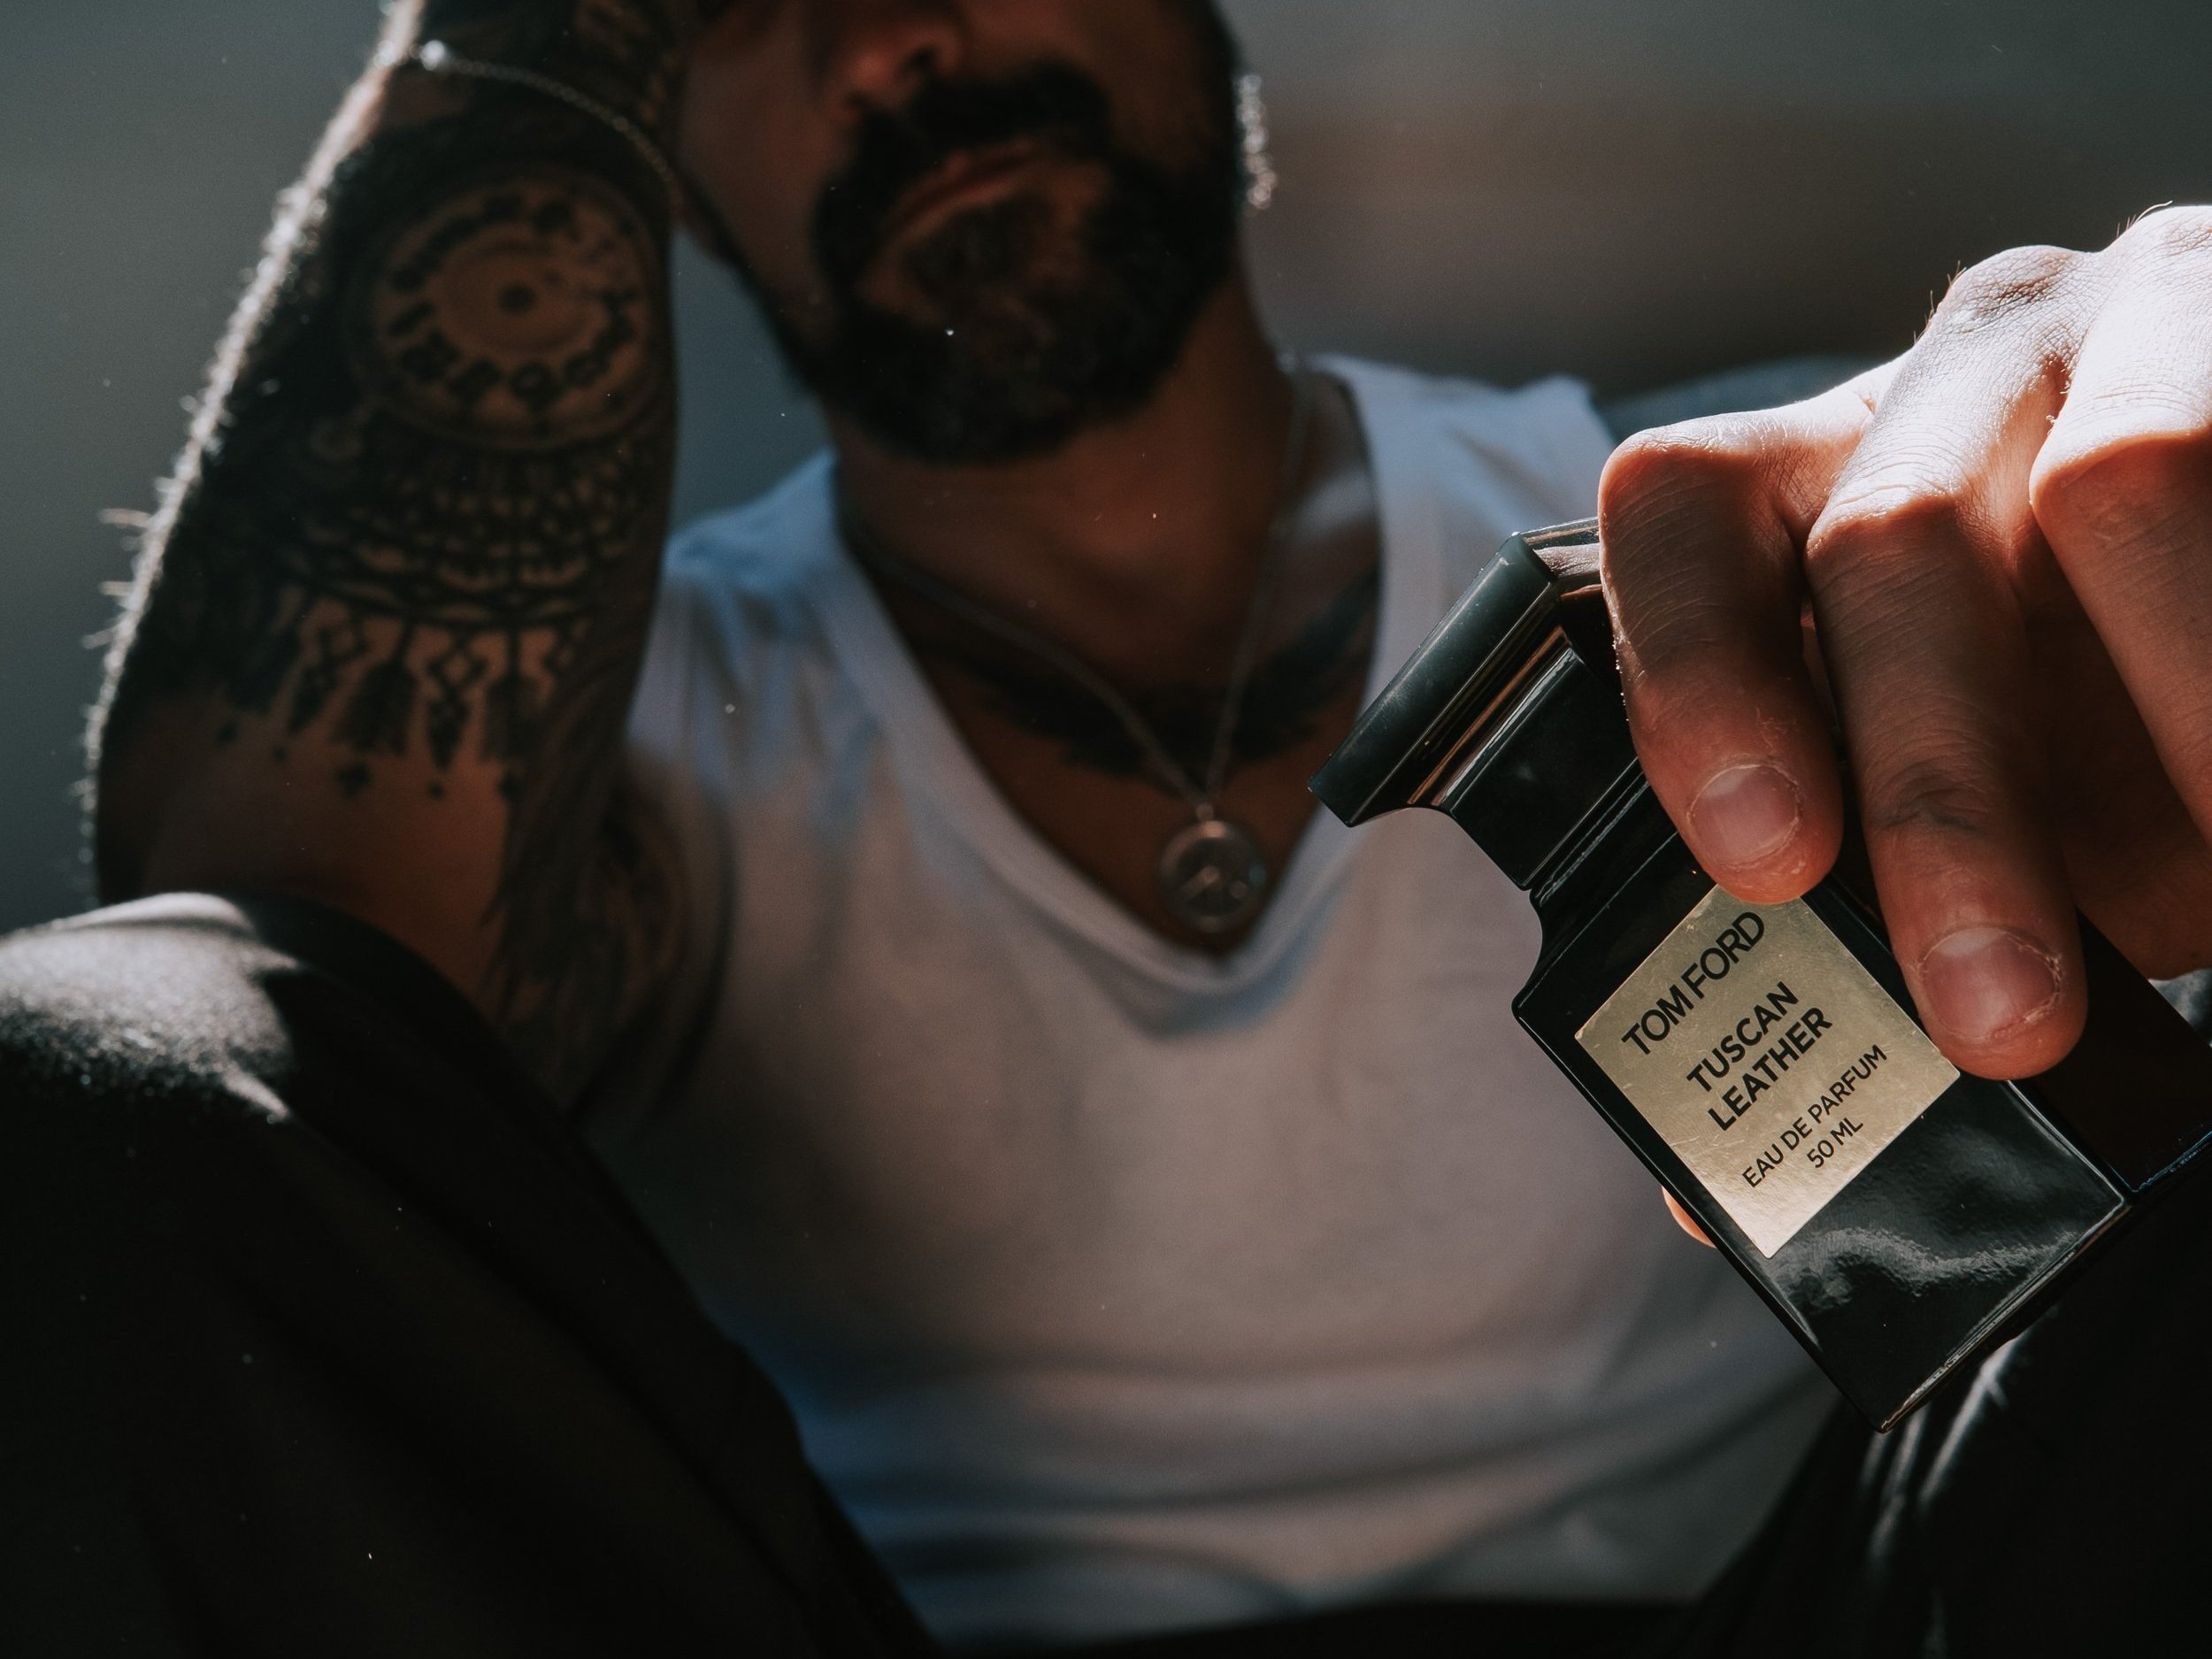 Noir Extreme by Tom Ford - The Most Sensual & Exotic Scent